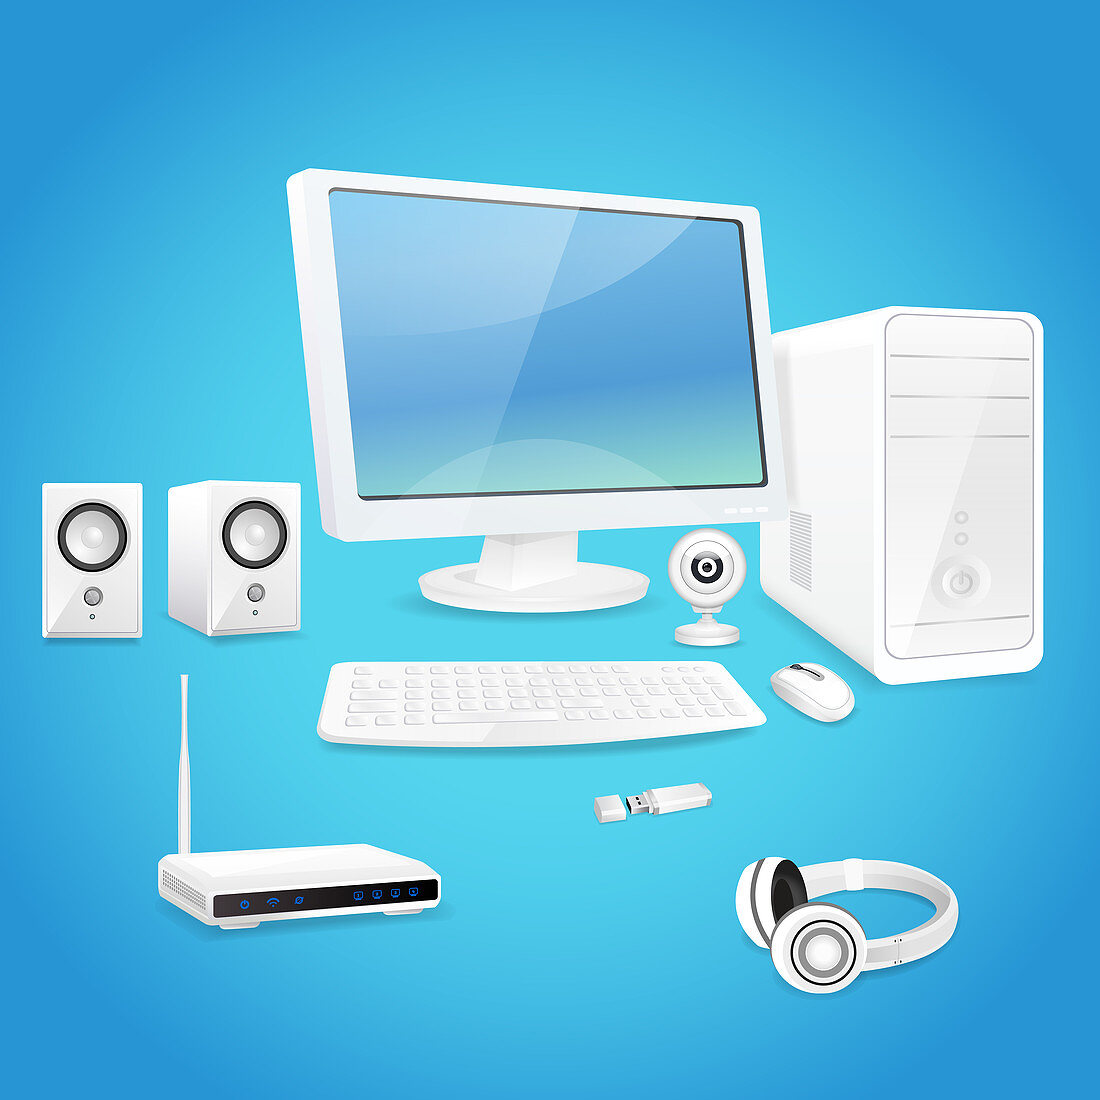 Computer and accessories, illustration